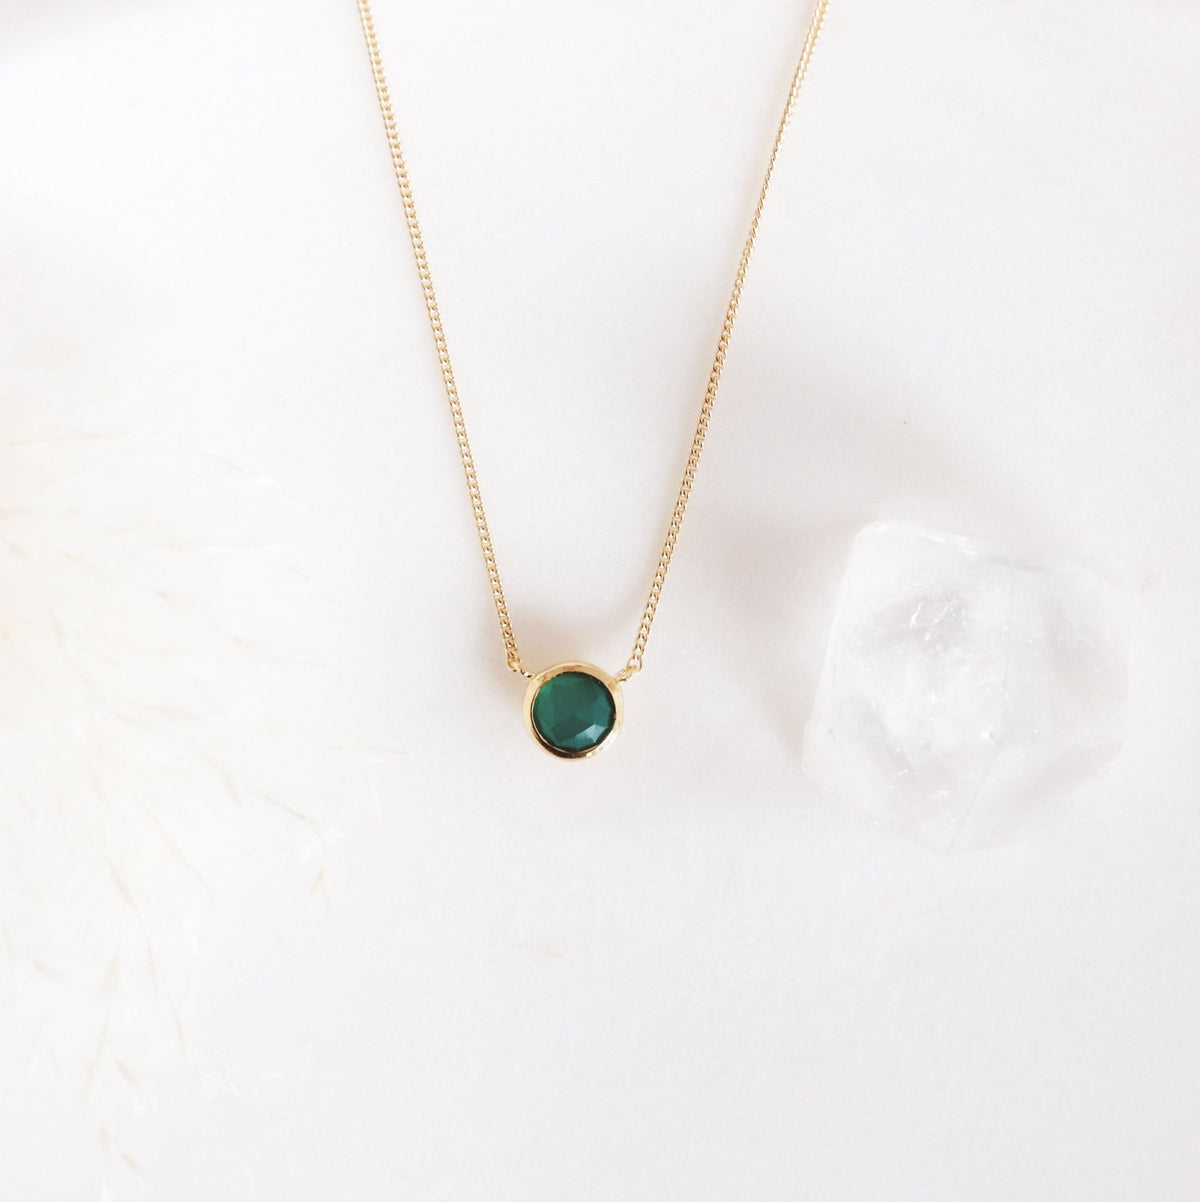 DAINTY LEGACY NECKLACE - GREEN ONYX &amp; GOLD - SO PRETTY CARA COTTER